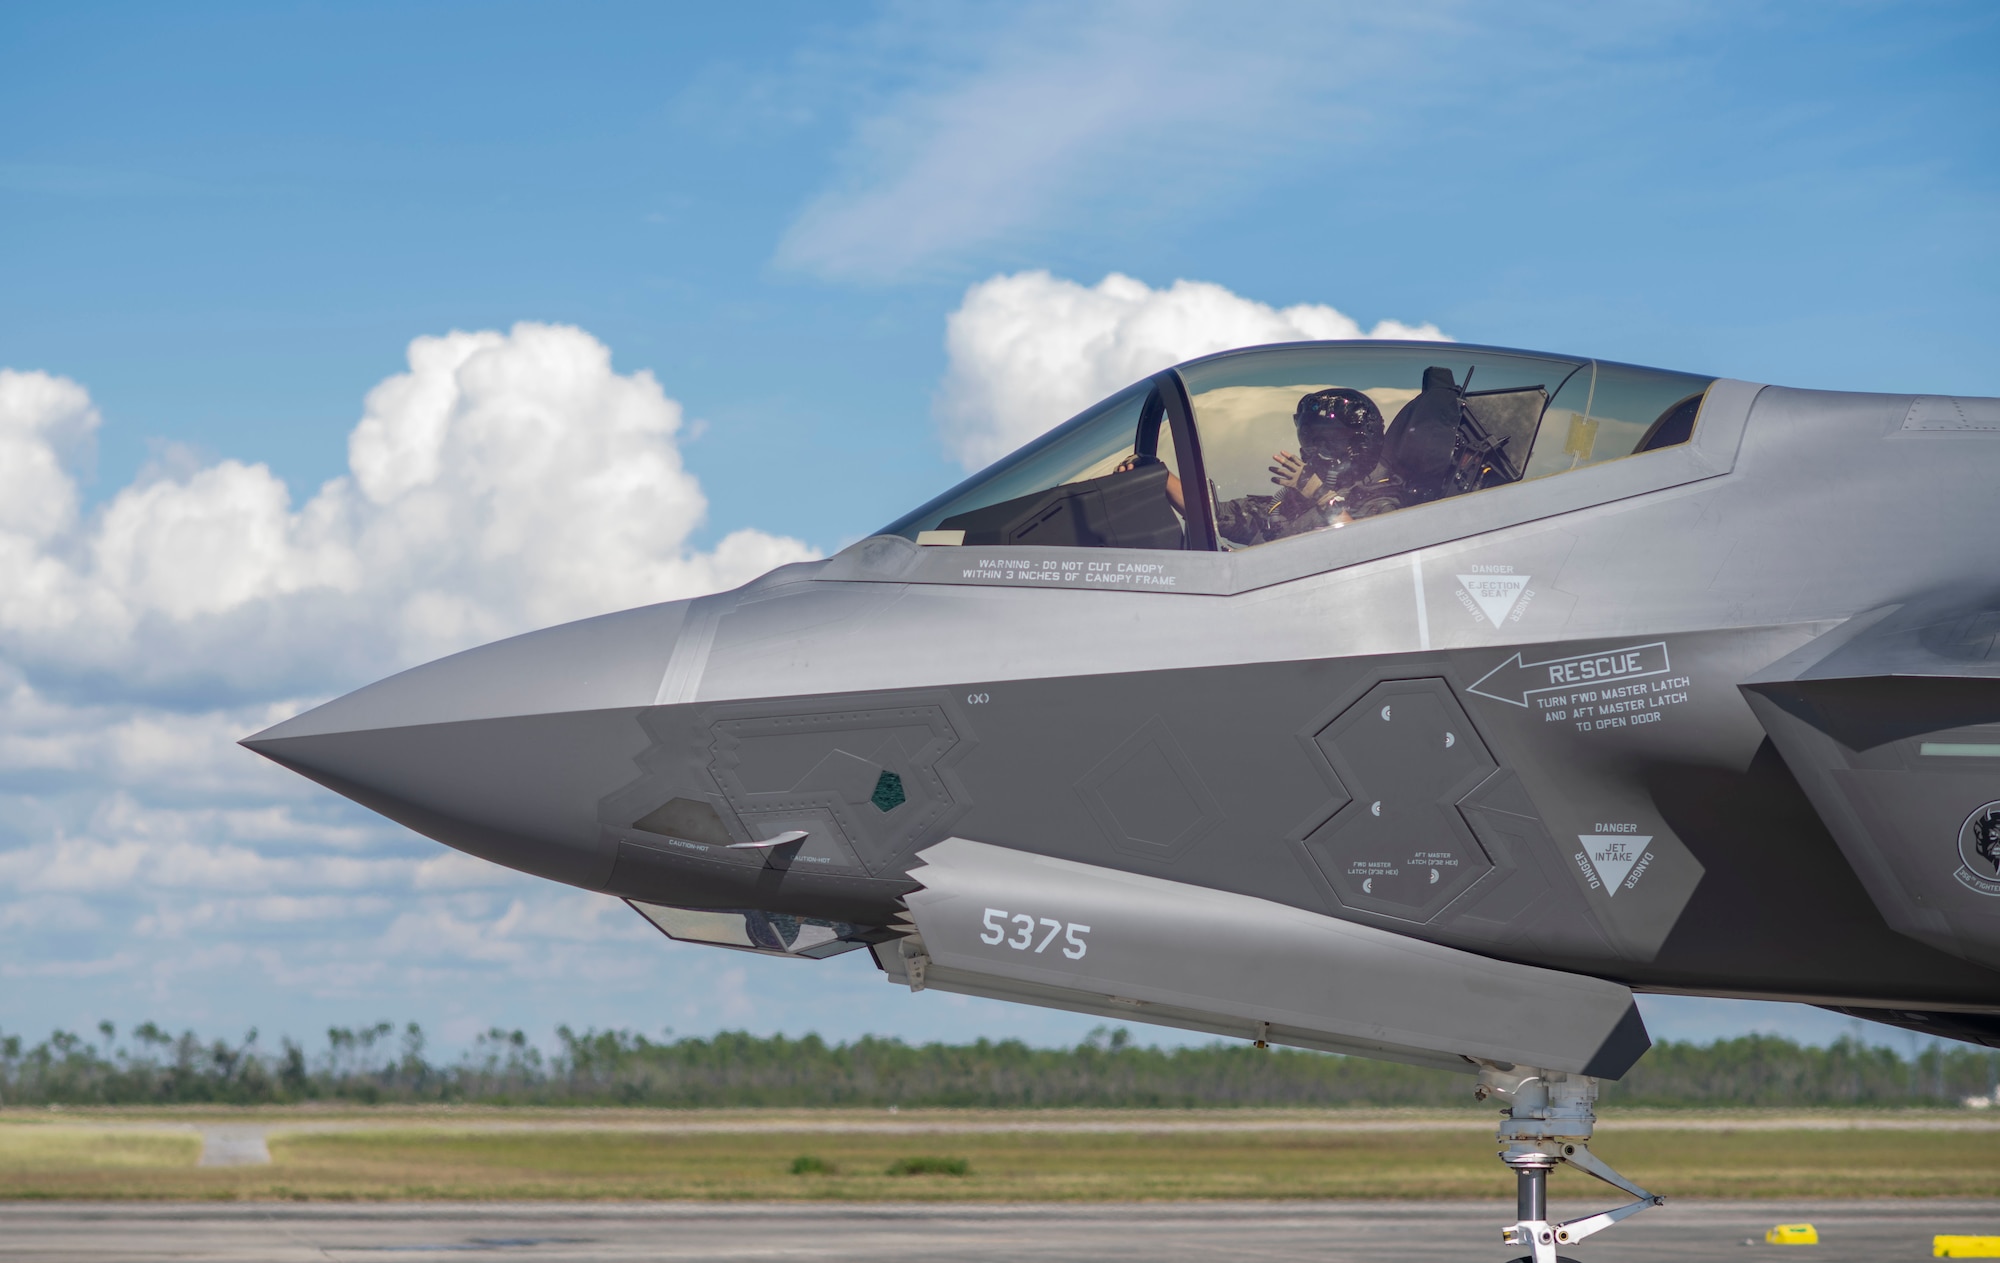 A U.S. Air Force F-35 Lightning II assigned to the 354th Fighter Wing, Eielson Air Force Base, Alaska, taxis at Tyndall AFB, Florida, Oct. 15, 2021. The 356th Fighter Squadron participated in a Weapons System Evaluation Program, hosted by the 53rd Weapons Evaluation Group, where units are tested on air-to-air combat capabilities. (U.S. Air Force photo by Airman 1st Class Tiffany Price)